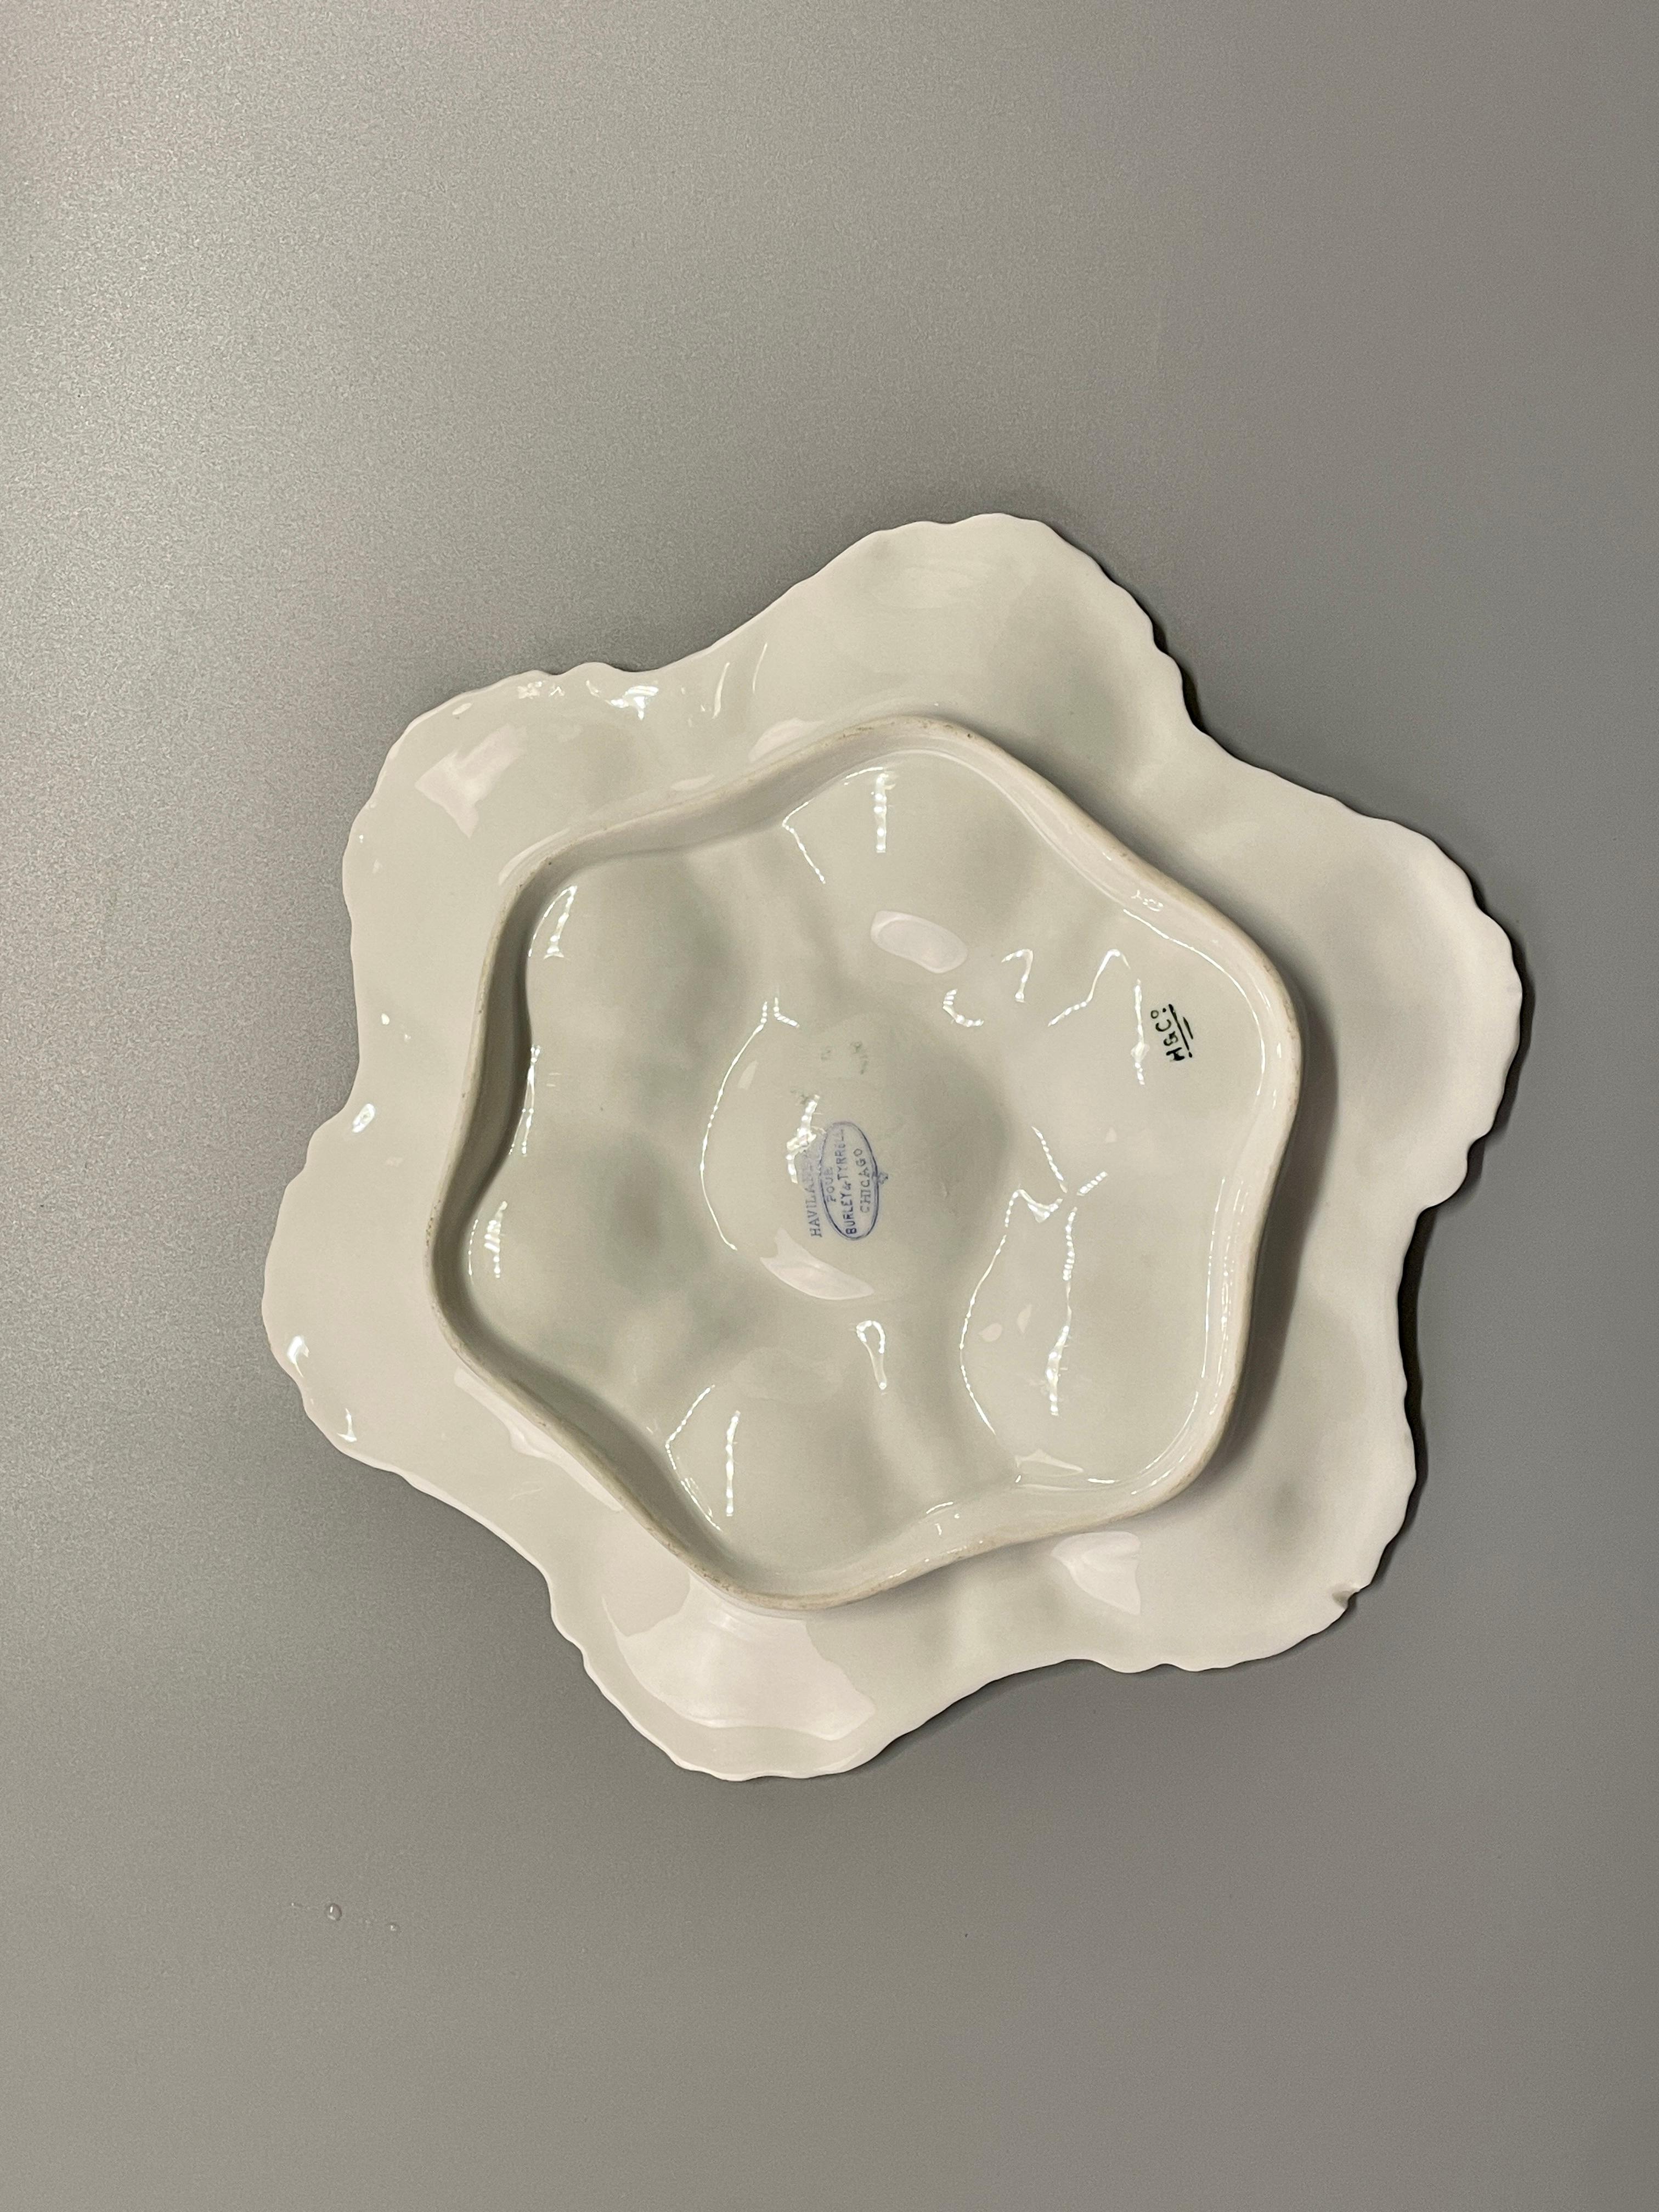 Ceramic Early 20th c French Porcelain Oyster Plates, Limoges, set of 4 For Sale